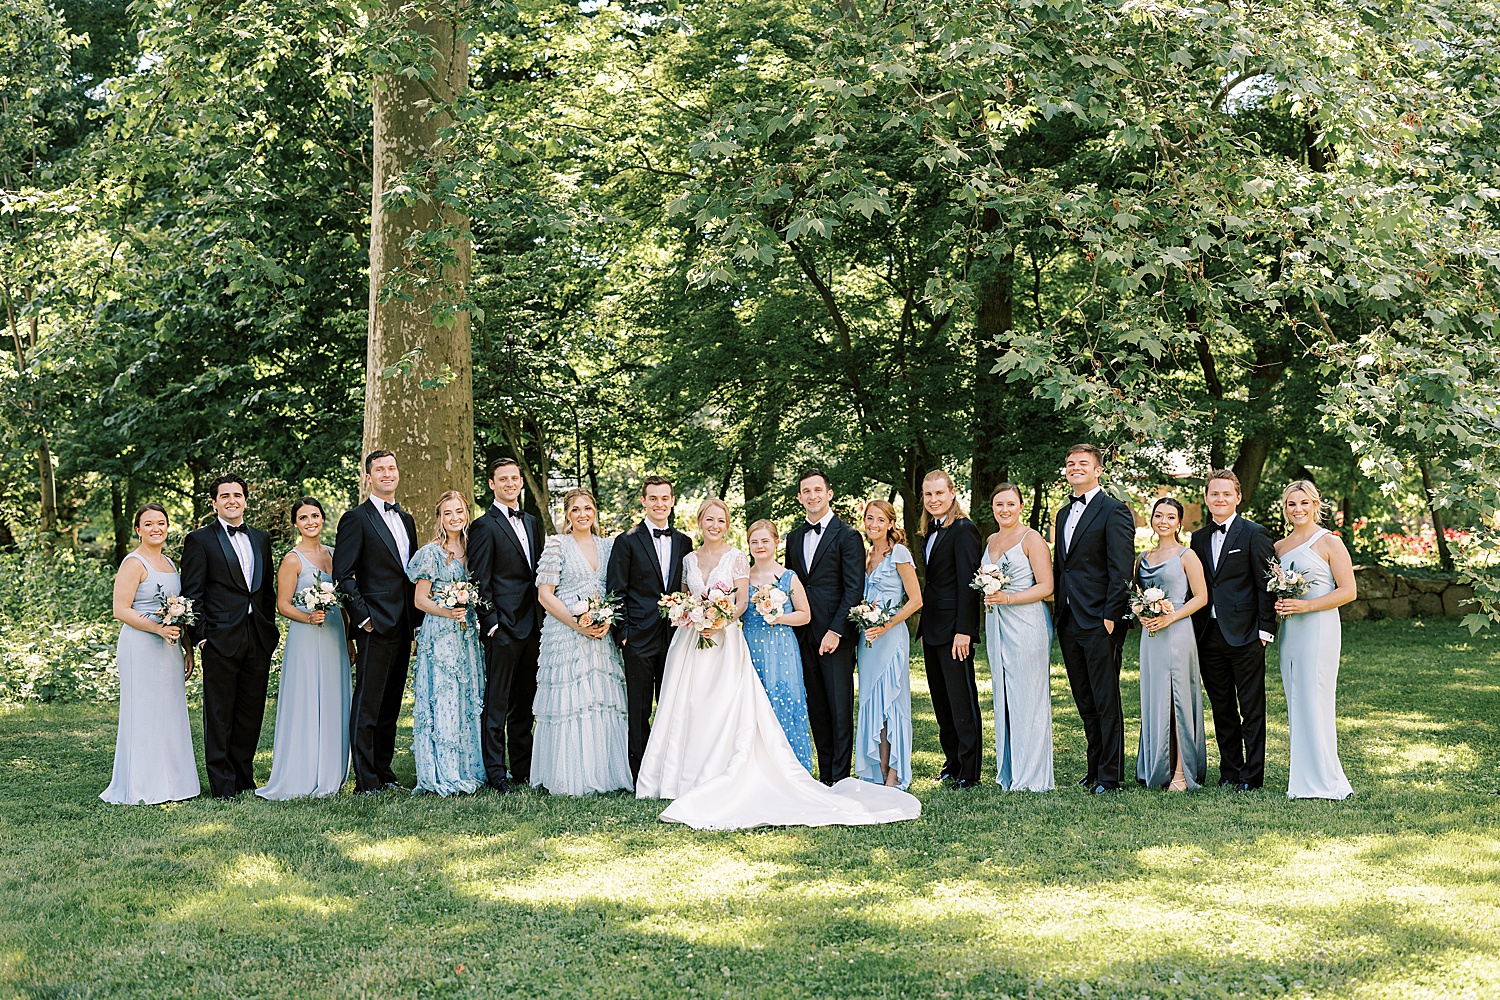 bride and groom pose with wedding party in classic suits and mismatched blue gowns at Glen Foerd on the Delaware